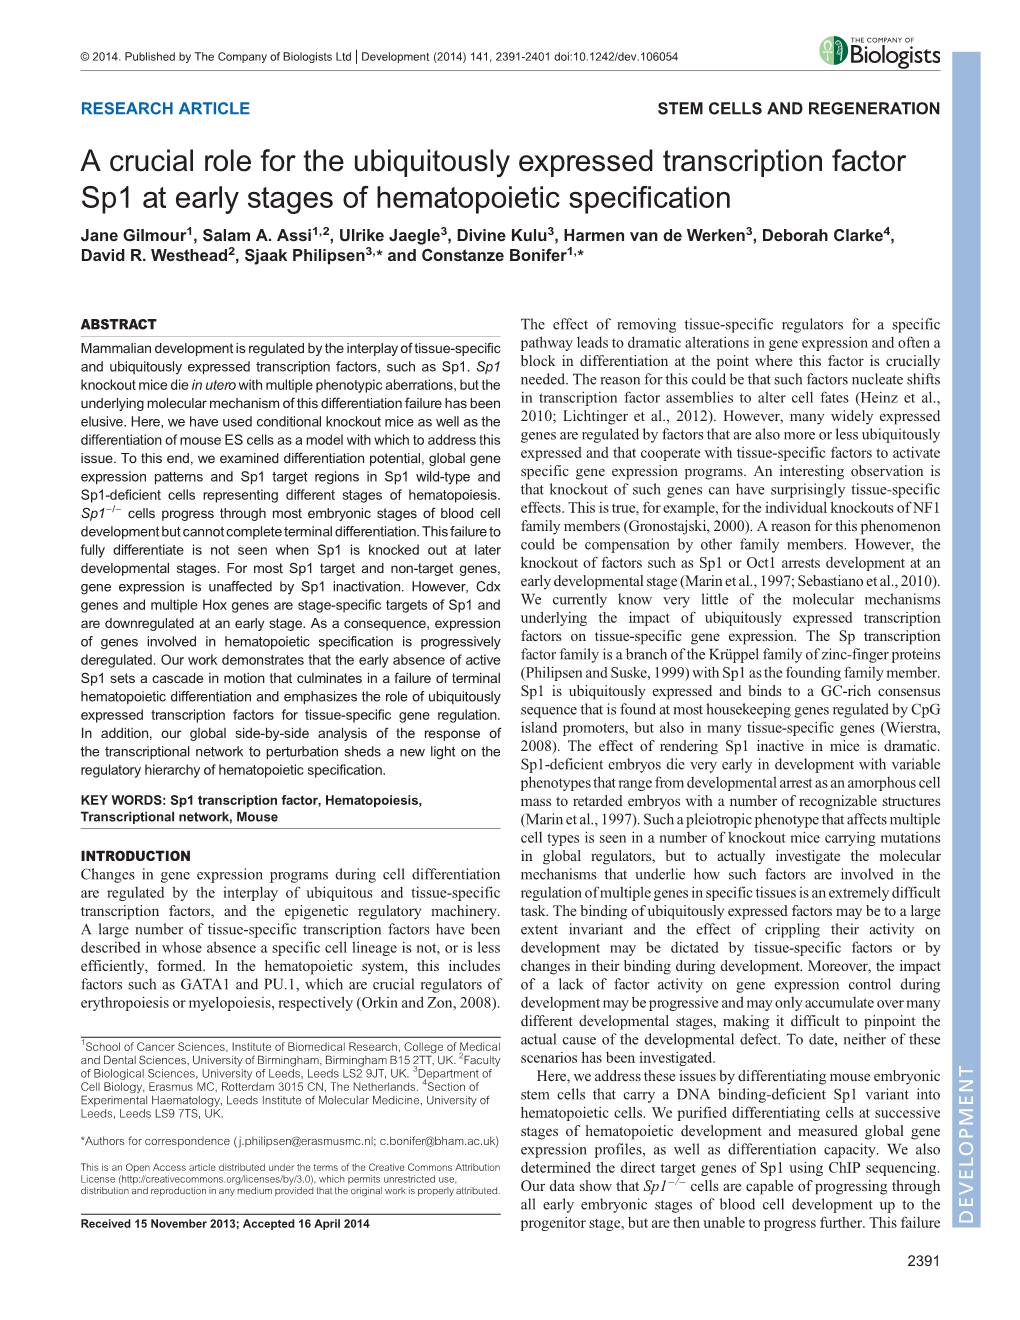 A Crucial Role for the Ubiquitously Expressed Transcription Factor Sp1 at Early Stages of Hematopoietic Specification Jane Gilmour1, Salam A